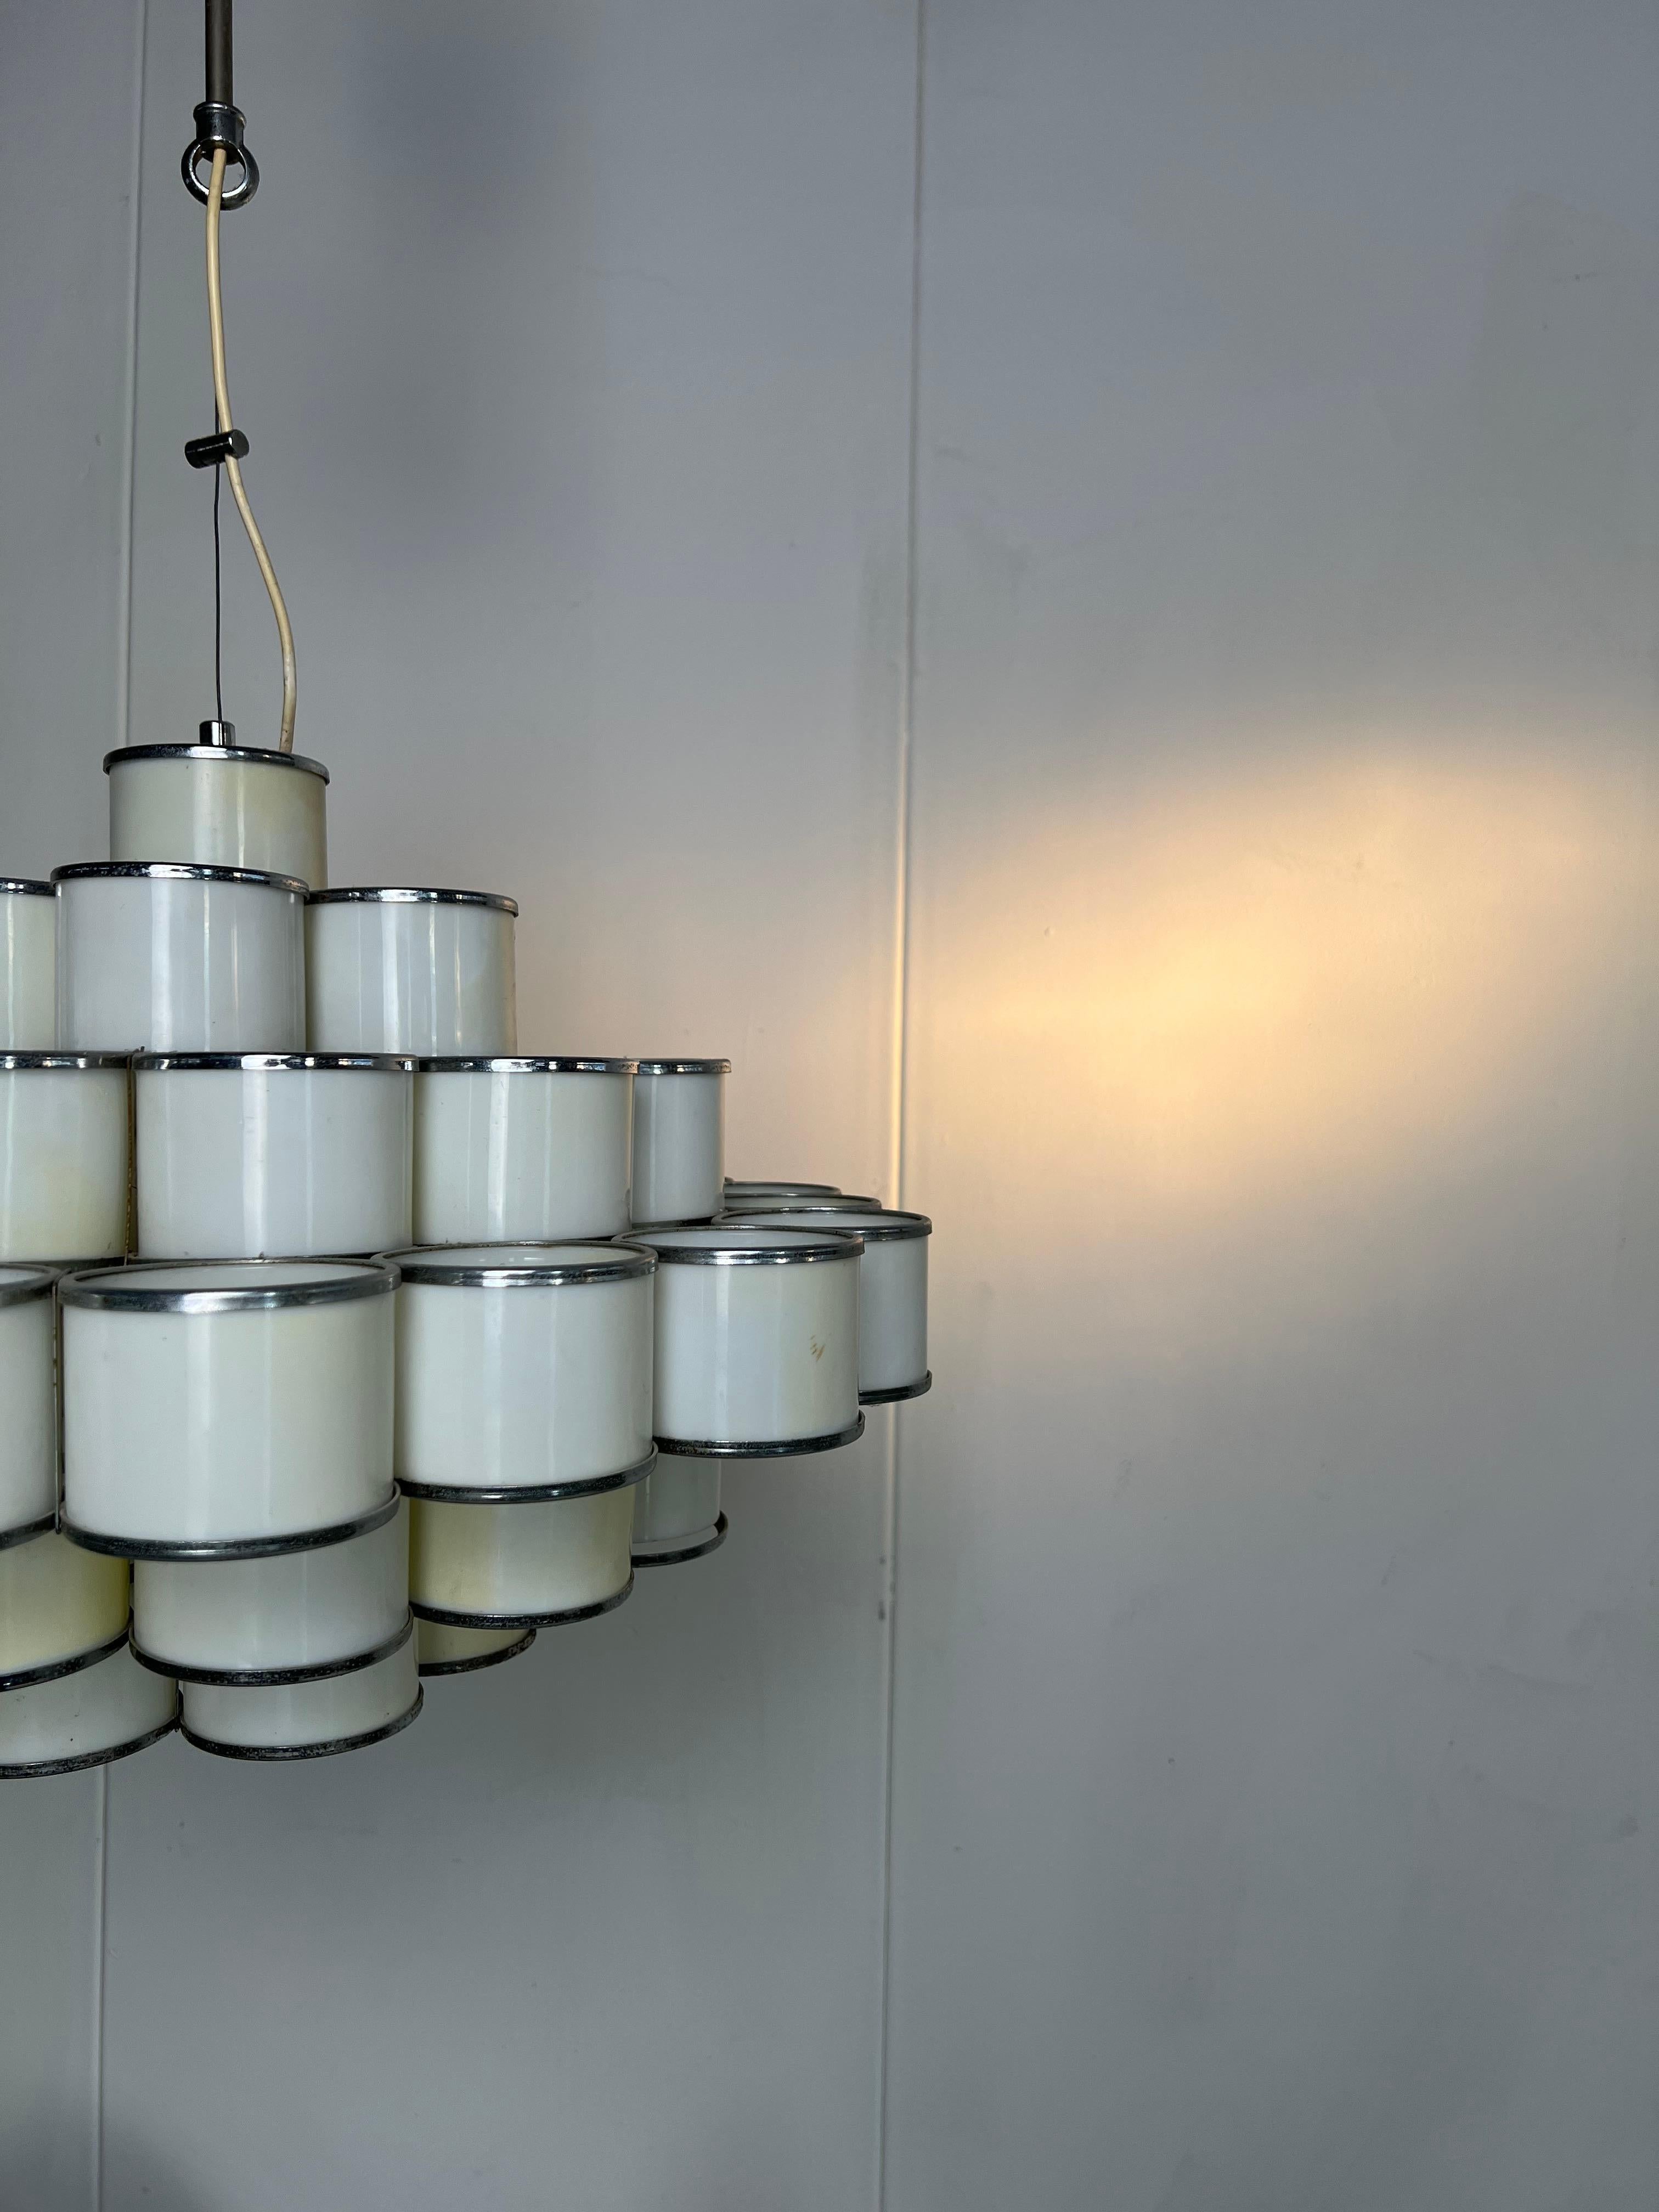 Charming mid century modern chandelier consisting of barrel shaped interconnected elements in translucent early plastic. Rare and impressive!

Height adjustable (steel cable) from 30 to 120cm approx. Can easily be made longer by changing the steel